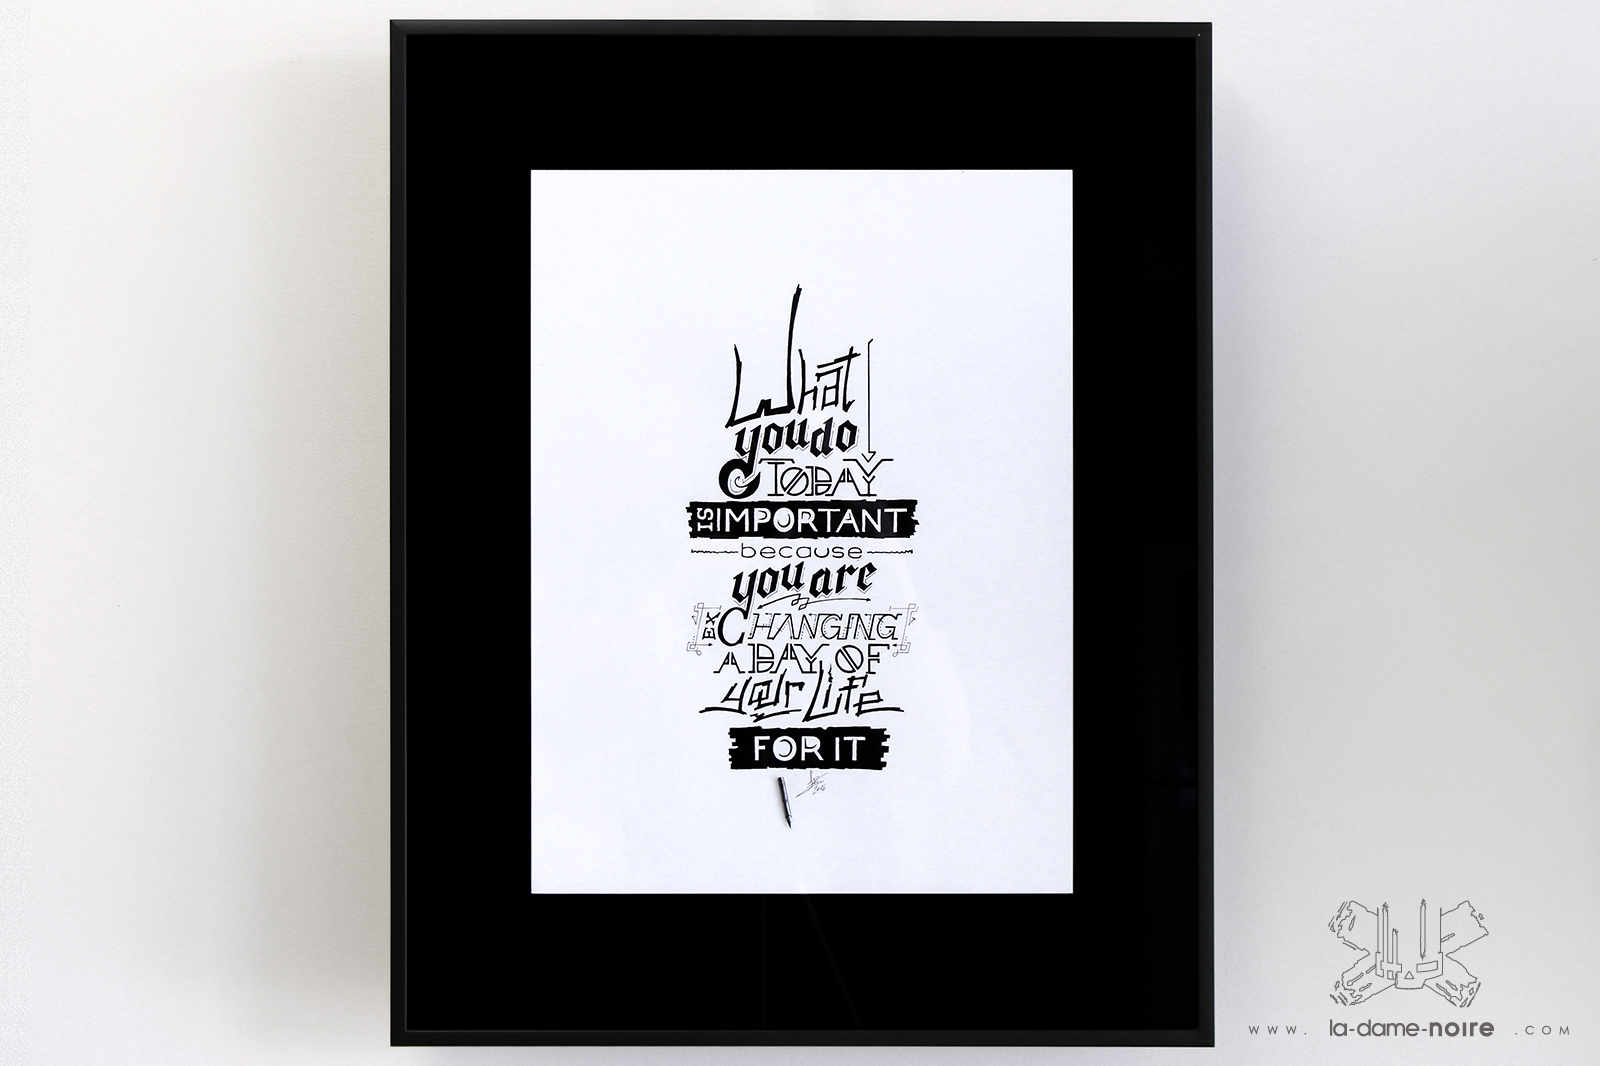 Dessin typographique avec la citation : What You o Today Is Important Because You Are Exchanging A Day For It